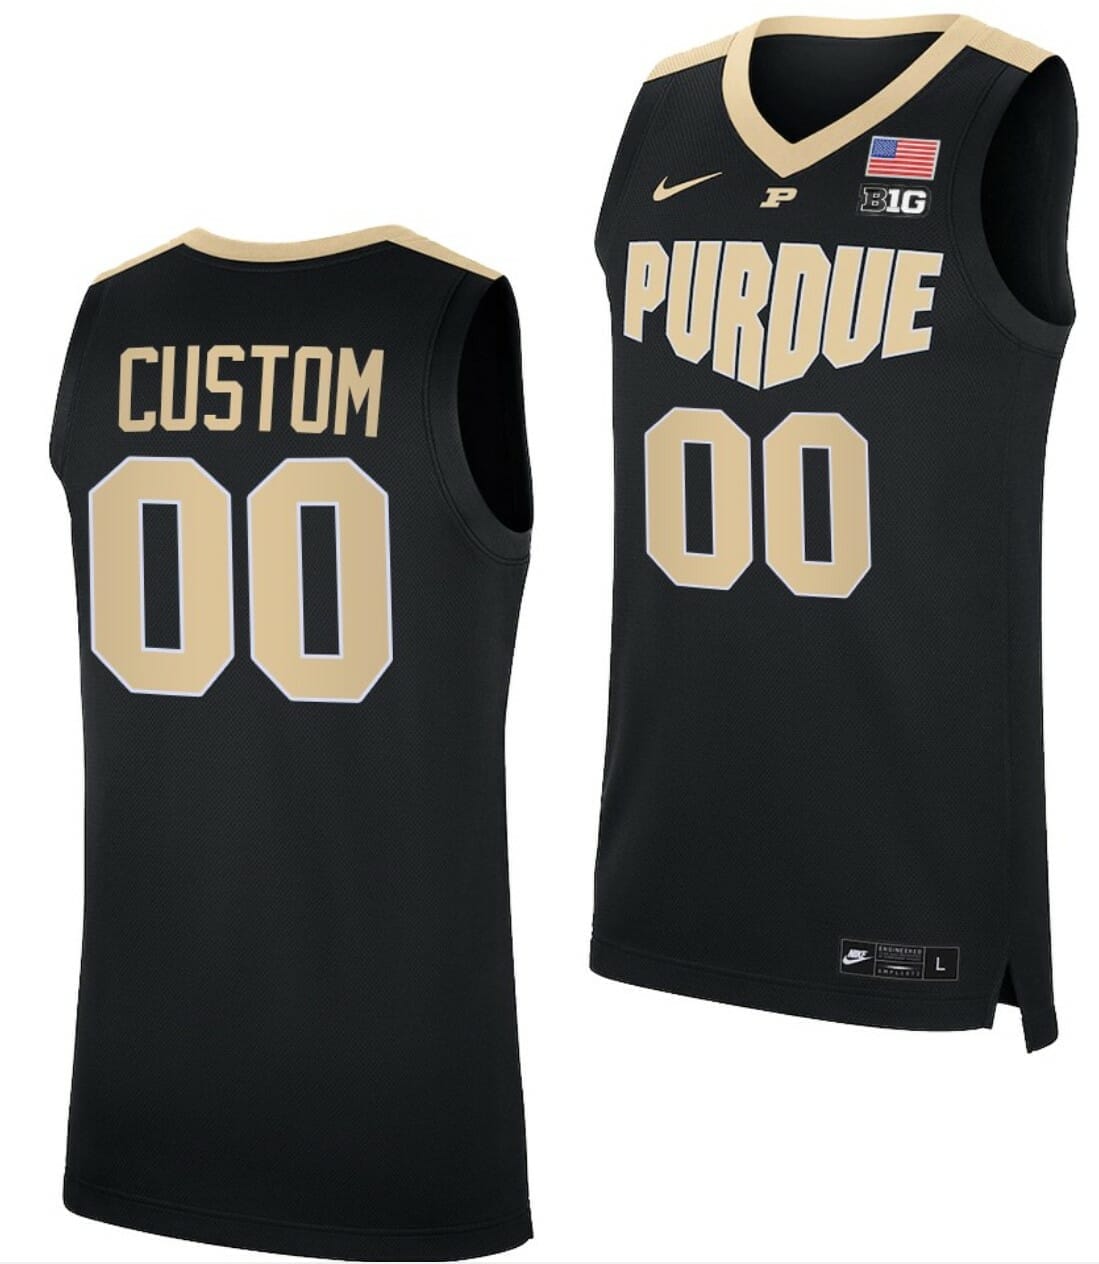 Custom Pittsburgh Panthers Jersey Purdue Boilermakers Name and Number NCAA Basketball Jerseys Alumni Black